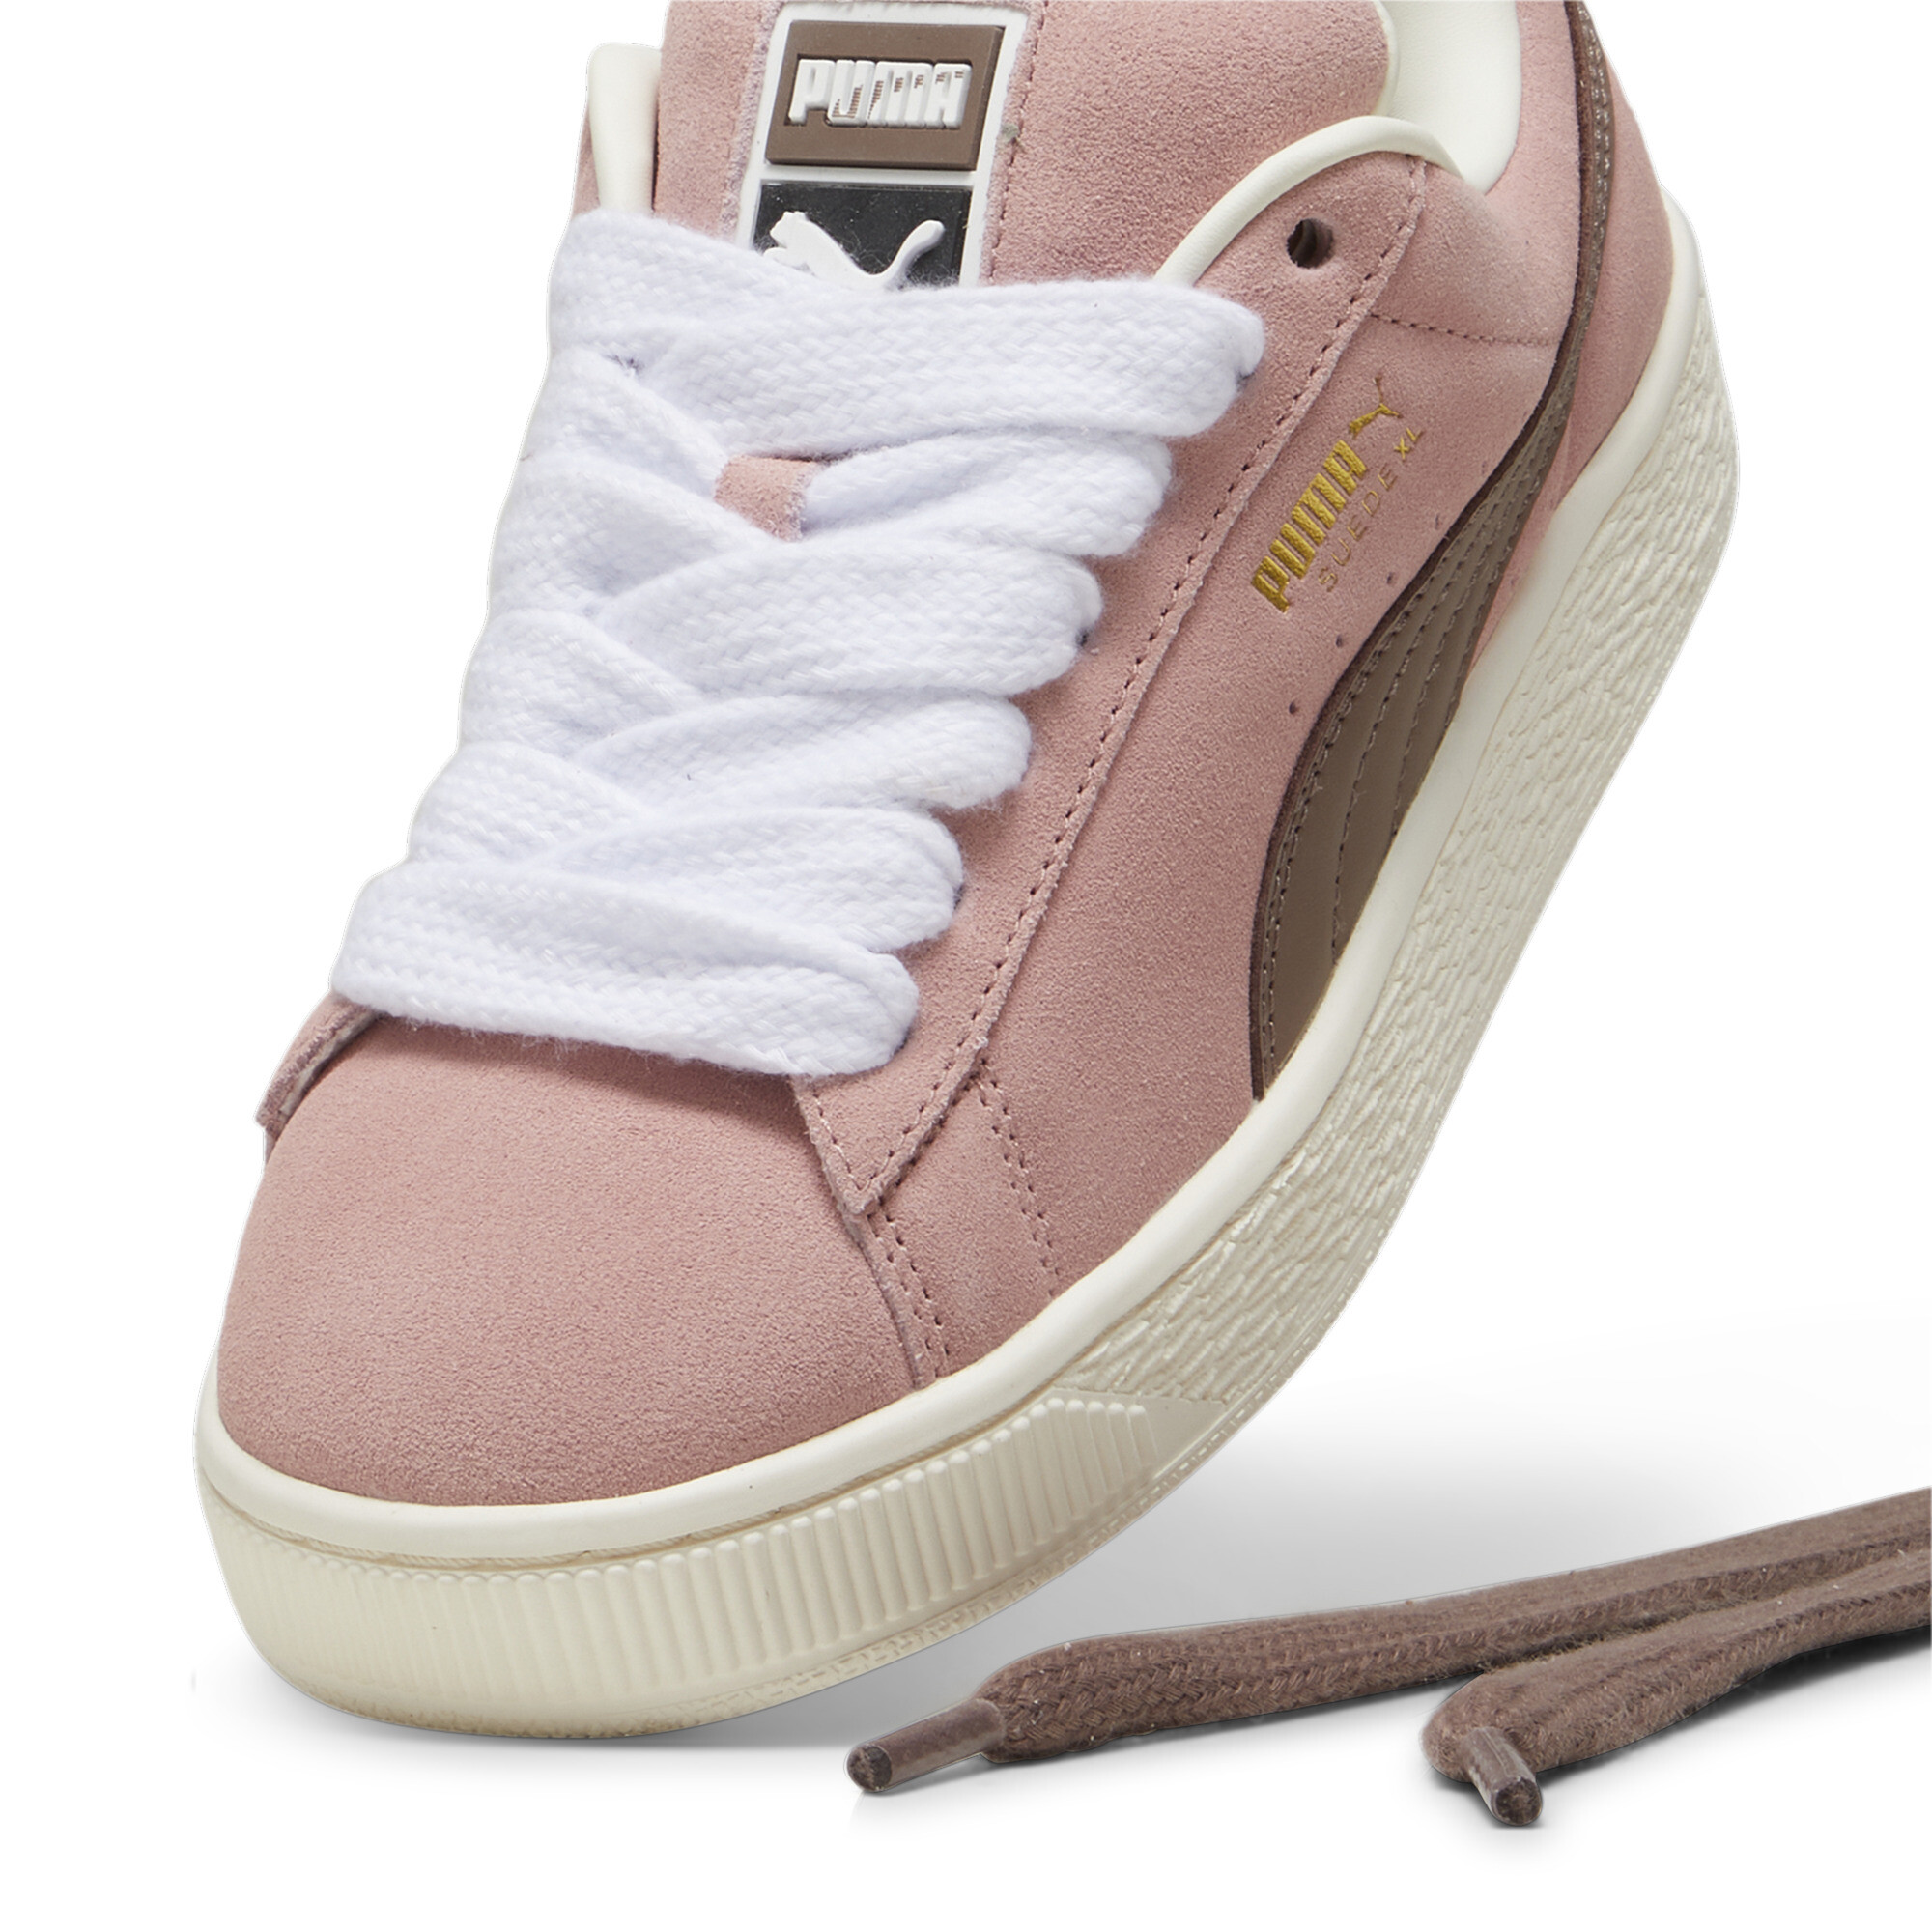 Puma Suede XL Sneakers Unisex, Pink, Size 43, Shoes